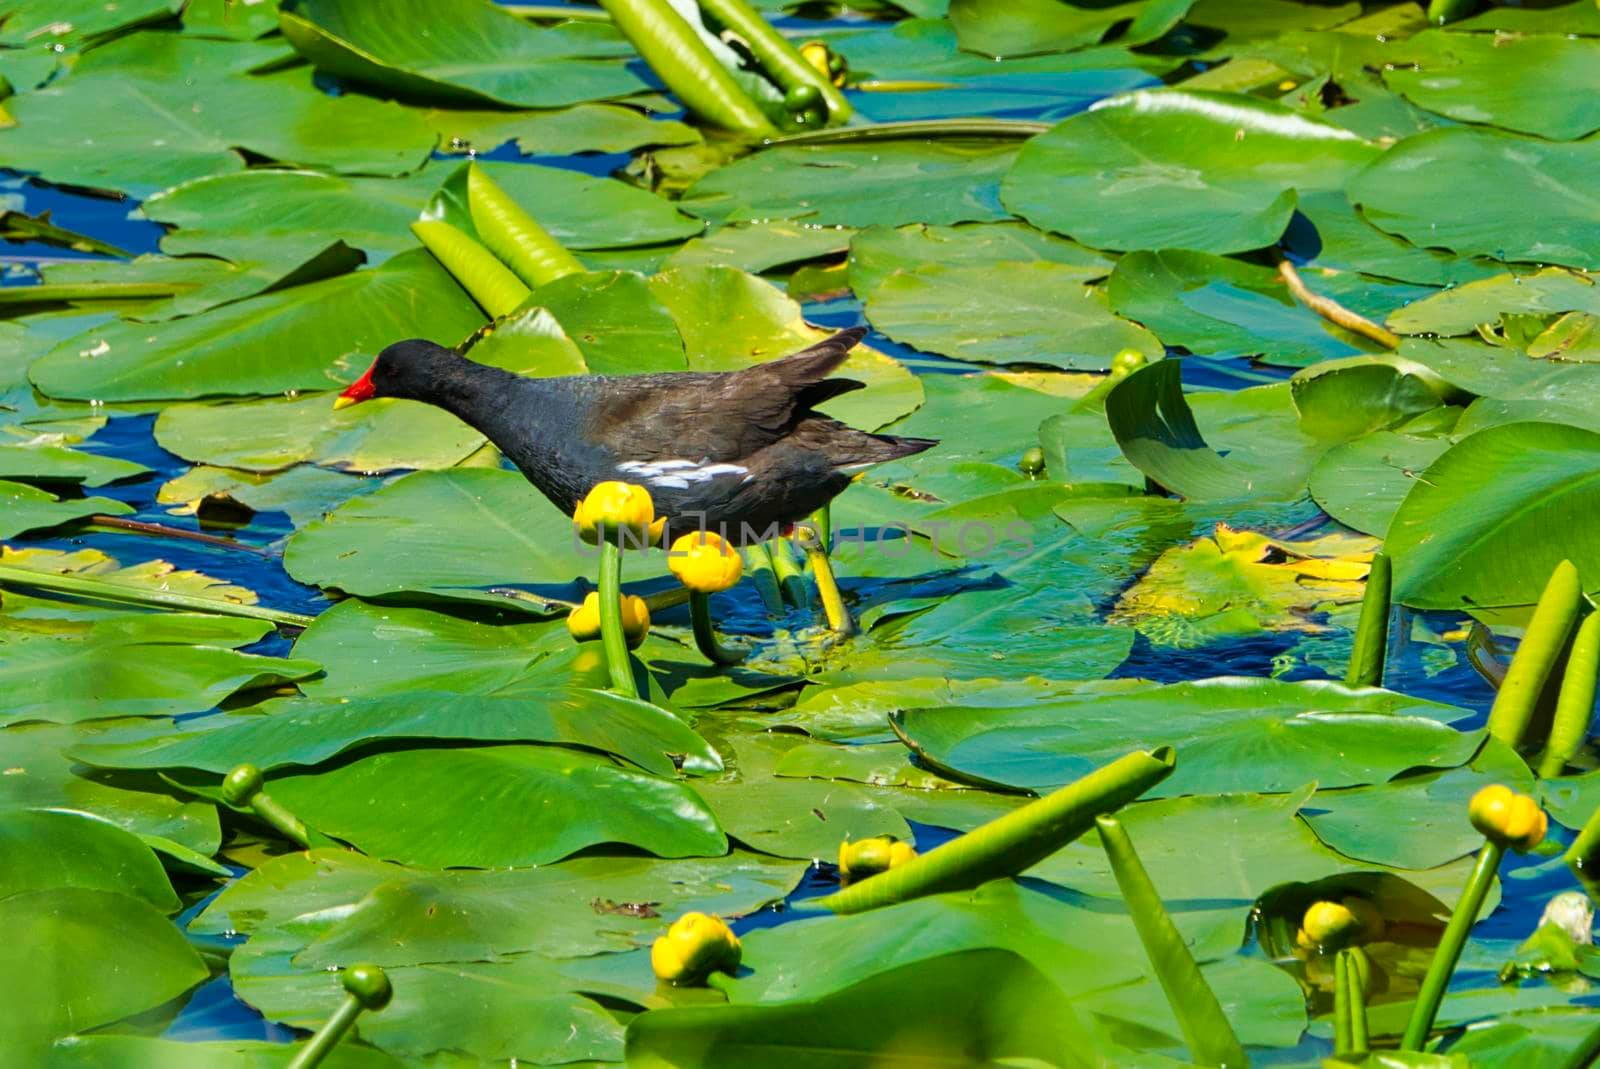 Eurasian Common Moorhen on a green water plant in Heligoland by Bullysoft